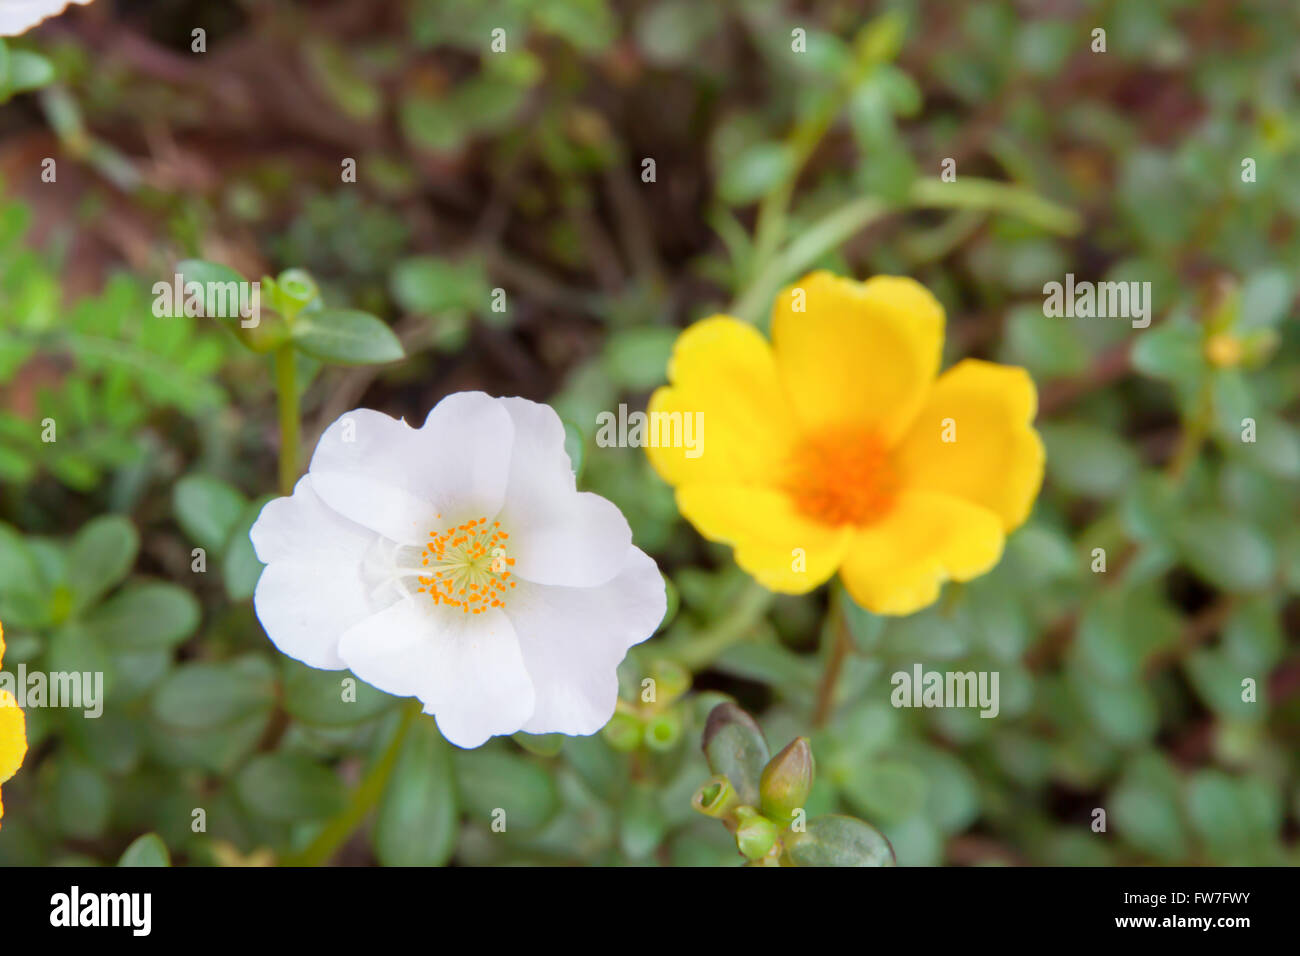 Sun Rose flower white and yellow color in garden Stock Photo